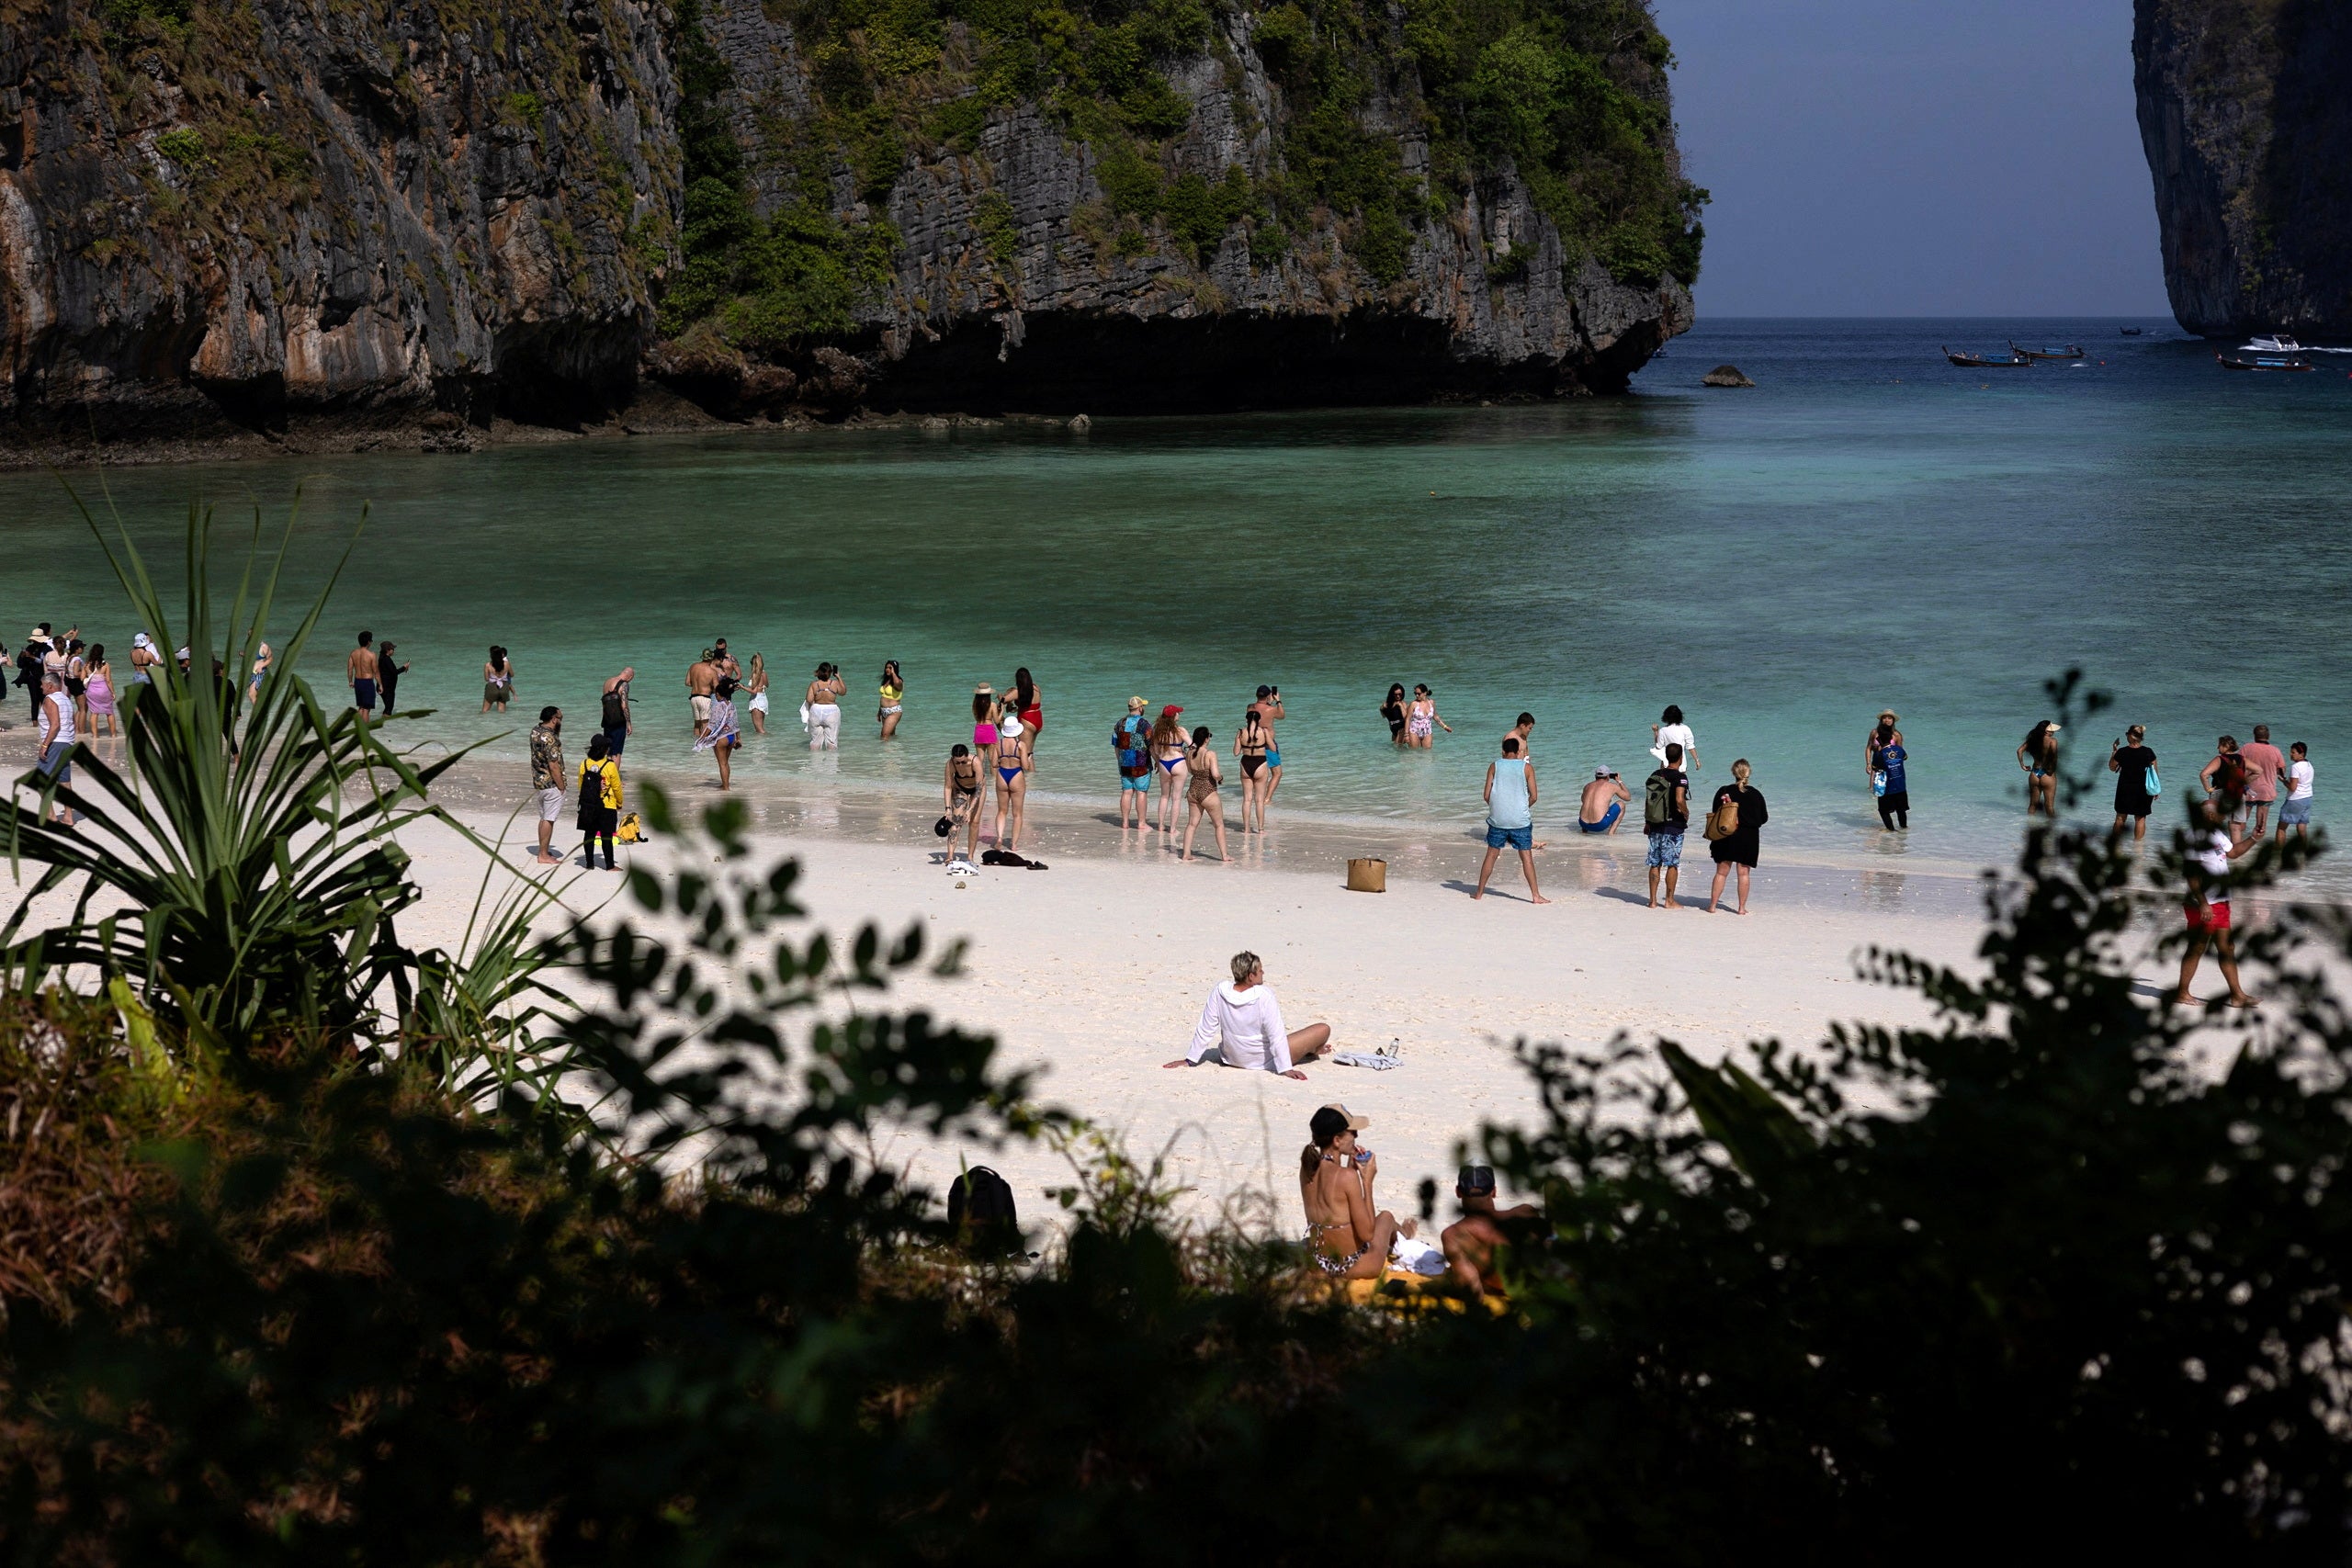 Tourists enjoy the beach where swimming is forbidden and people are only allowed to enter water up to their knees